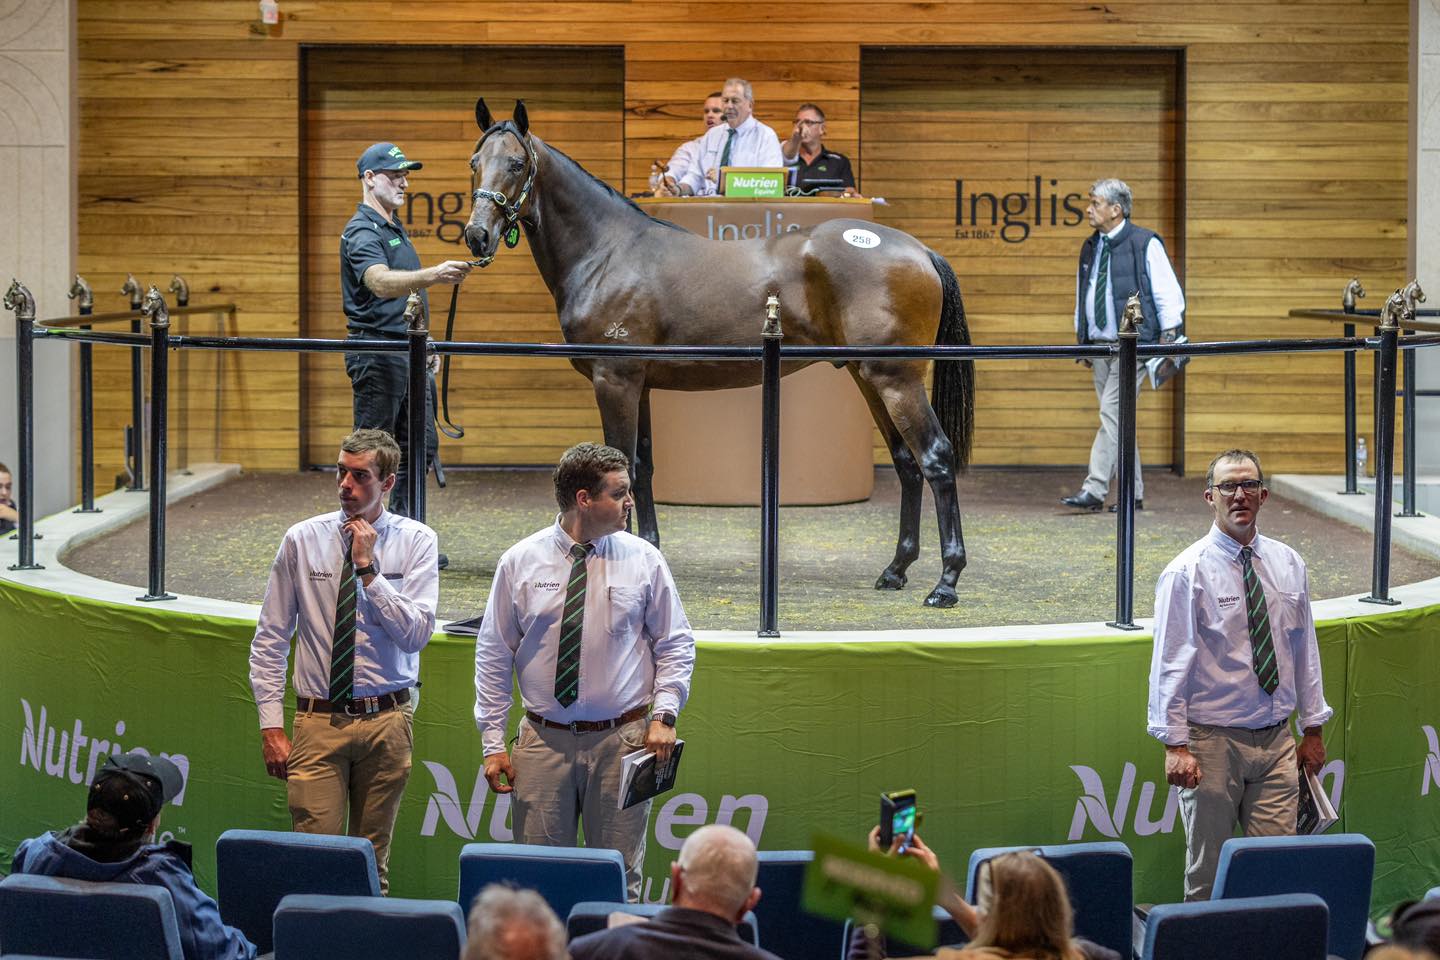 Quality yearlings sell well at Nutrien Melbourne sale